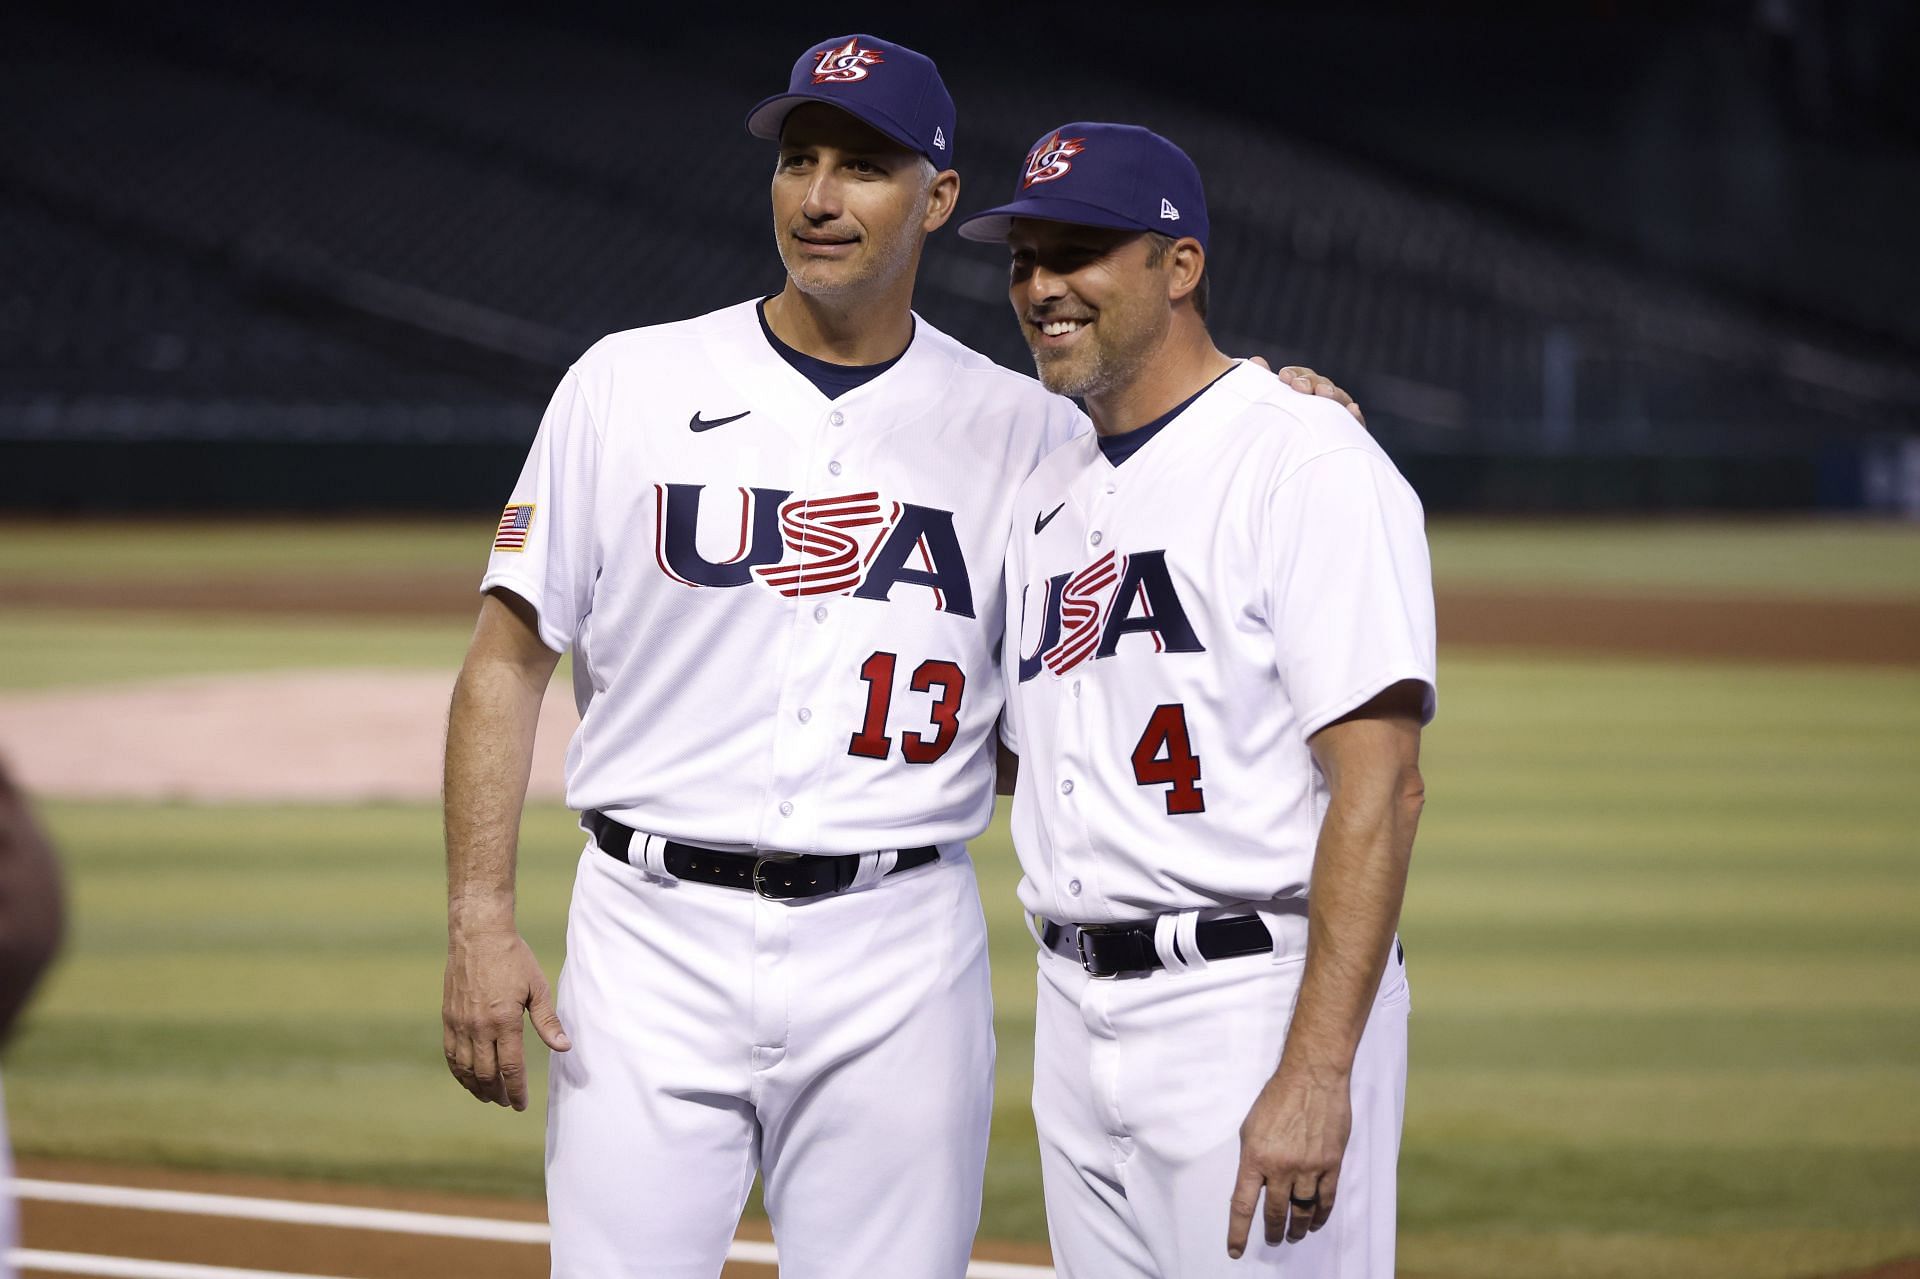 Pitching coach Andy Pettitte and manager Mark DeRosa of Team USA pose for a photo before the start of the World Baseball Classic at Chase Field